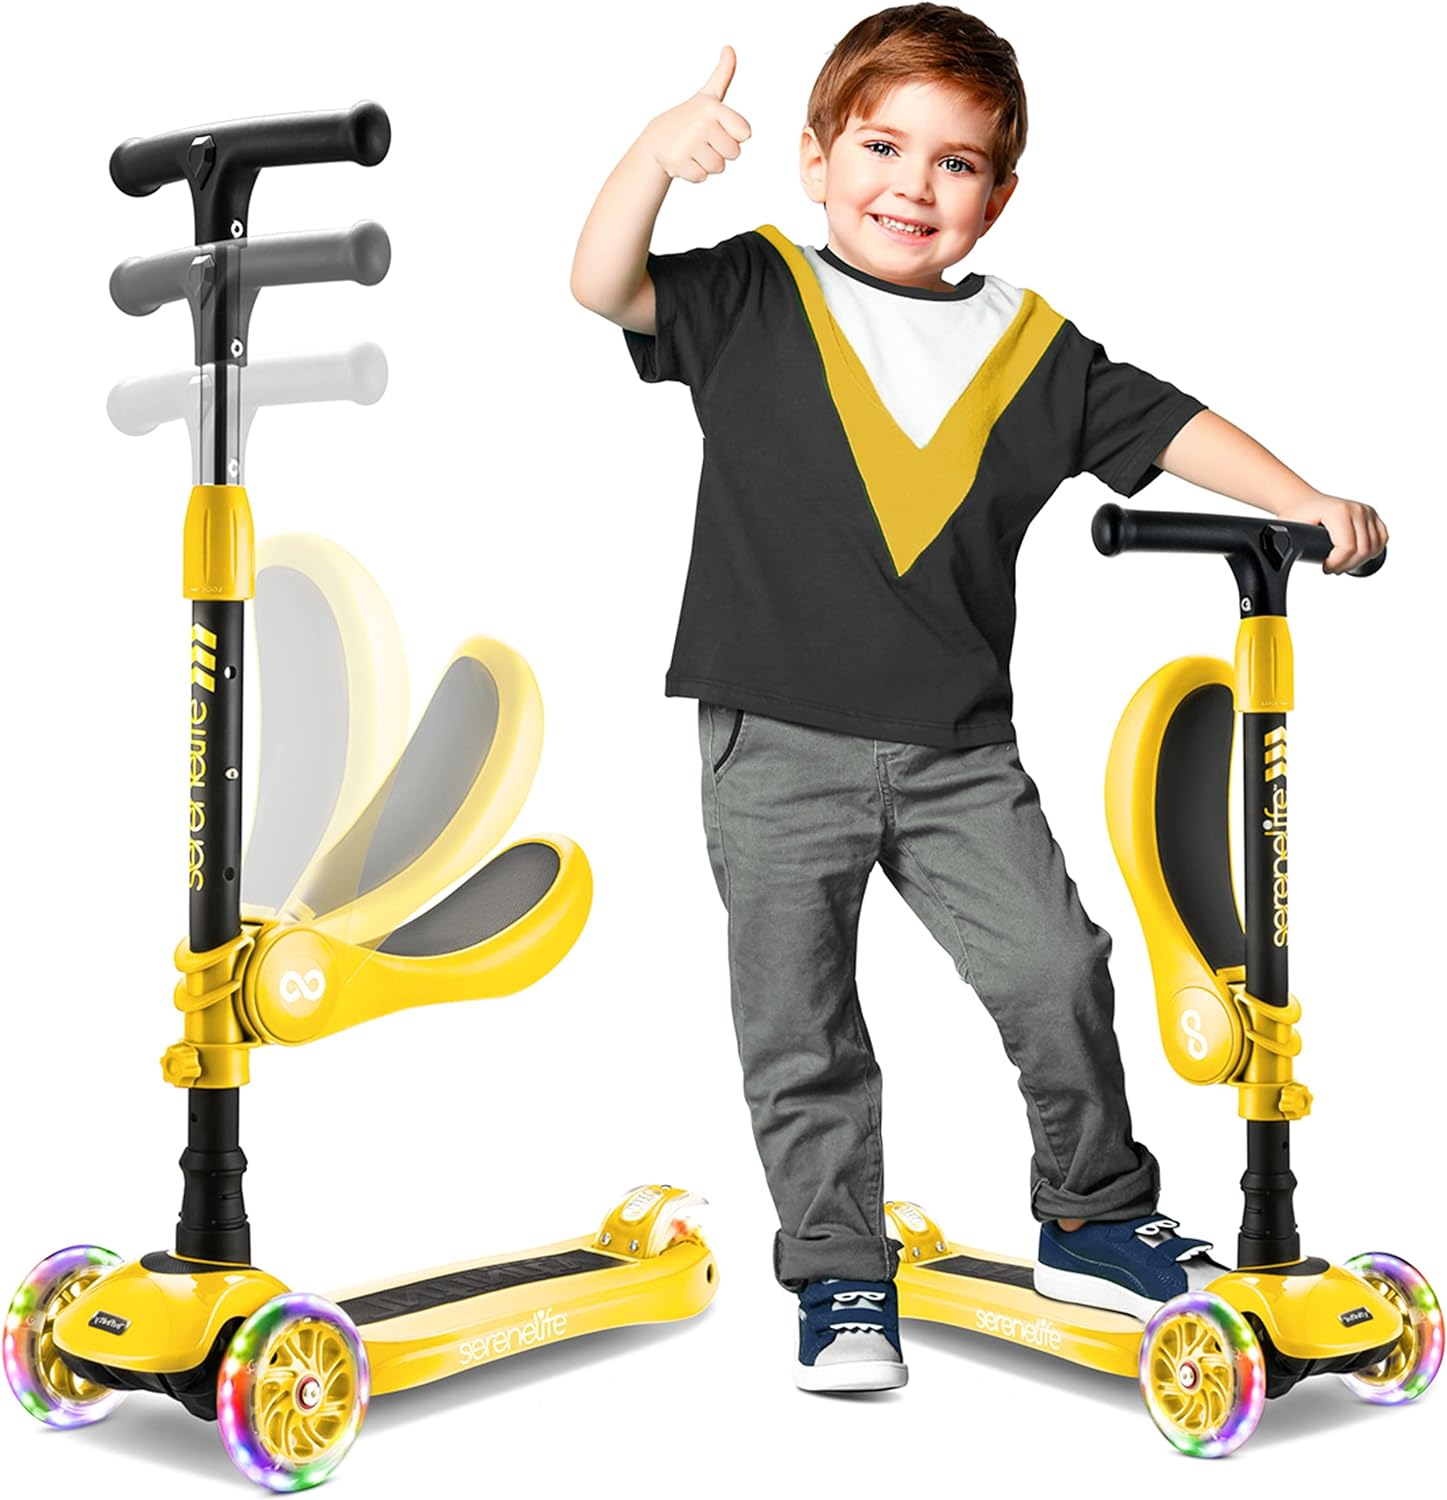 Scooter for Child Sit/Stand Toy Review